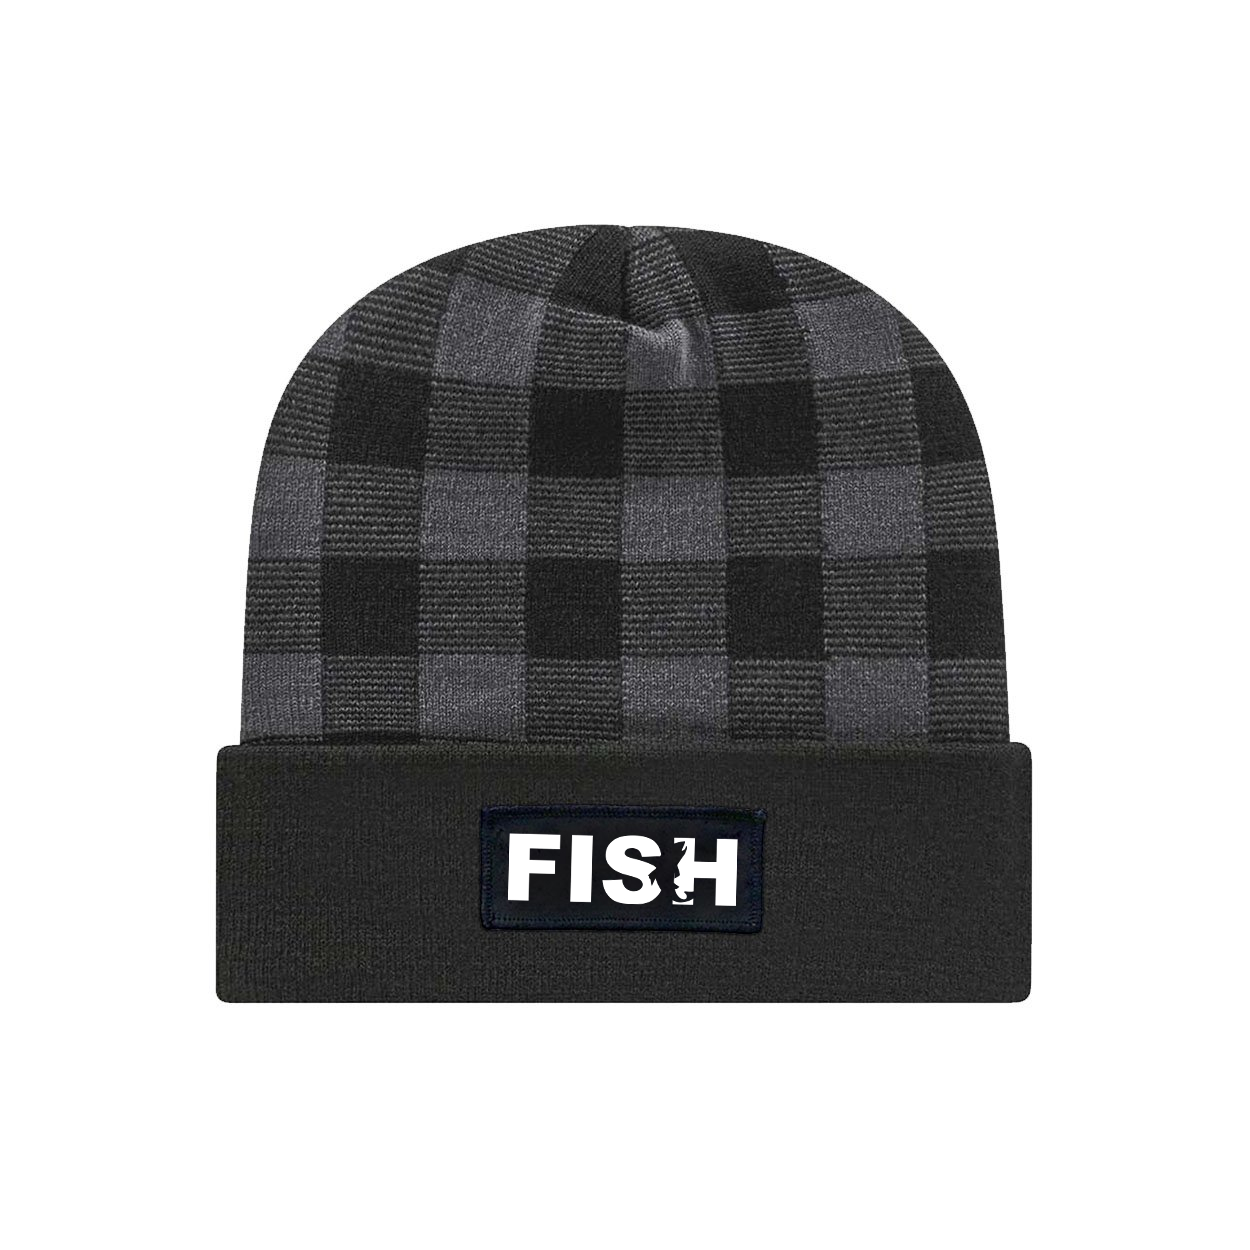 Fish Catch Logo Night Out Woven Patch Roll Up Plaid Beanie Black/Heather Gray (White Logo)